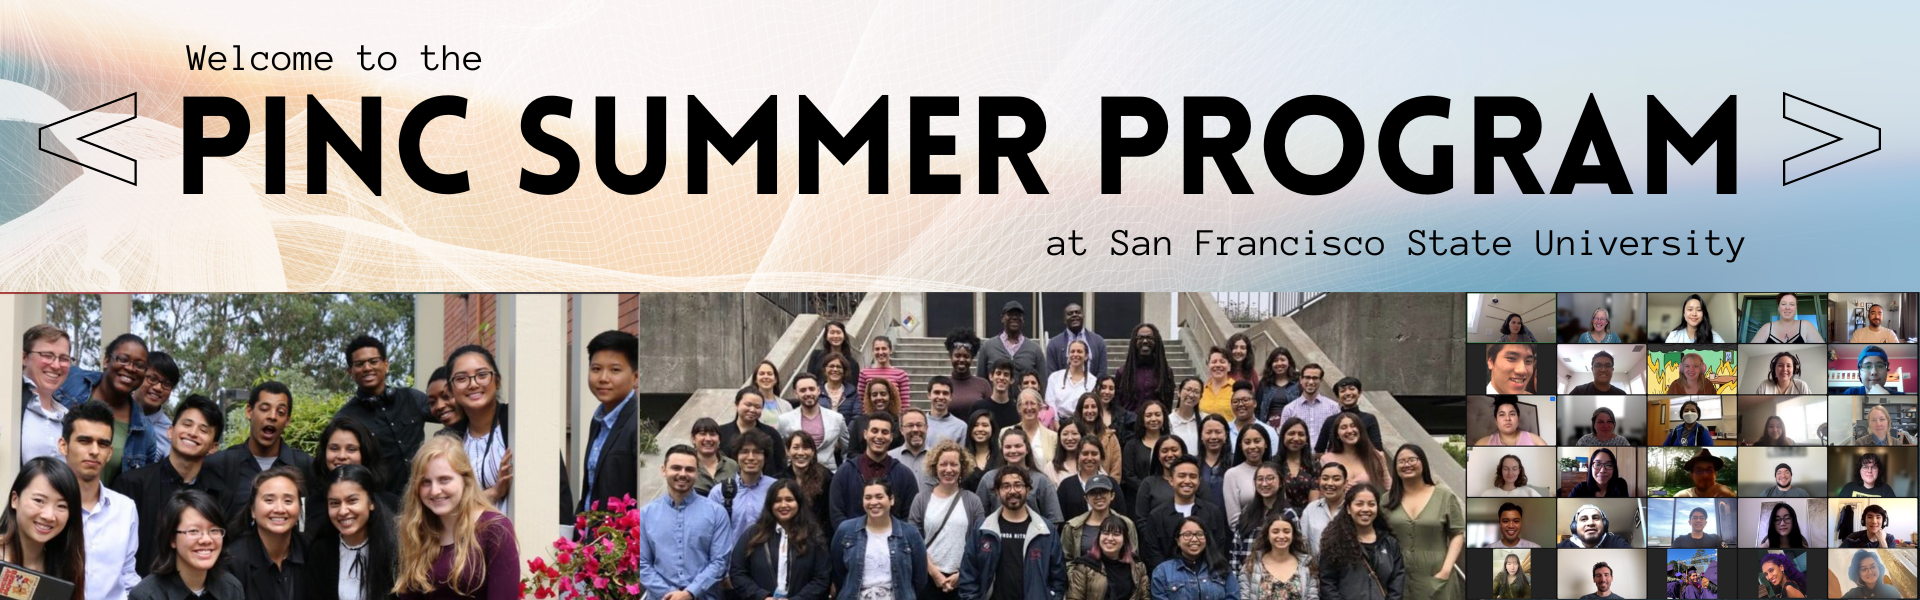 PINC Summer Program header with pictures of previous cohorts